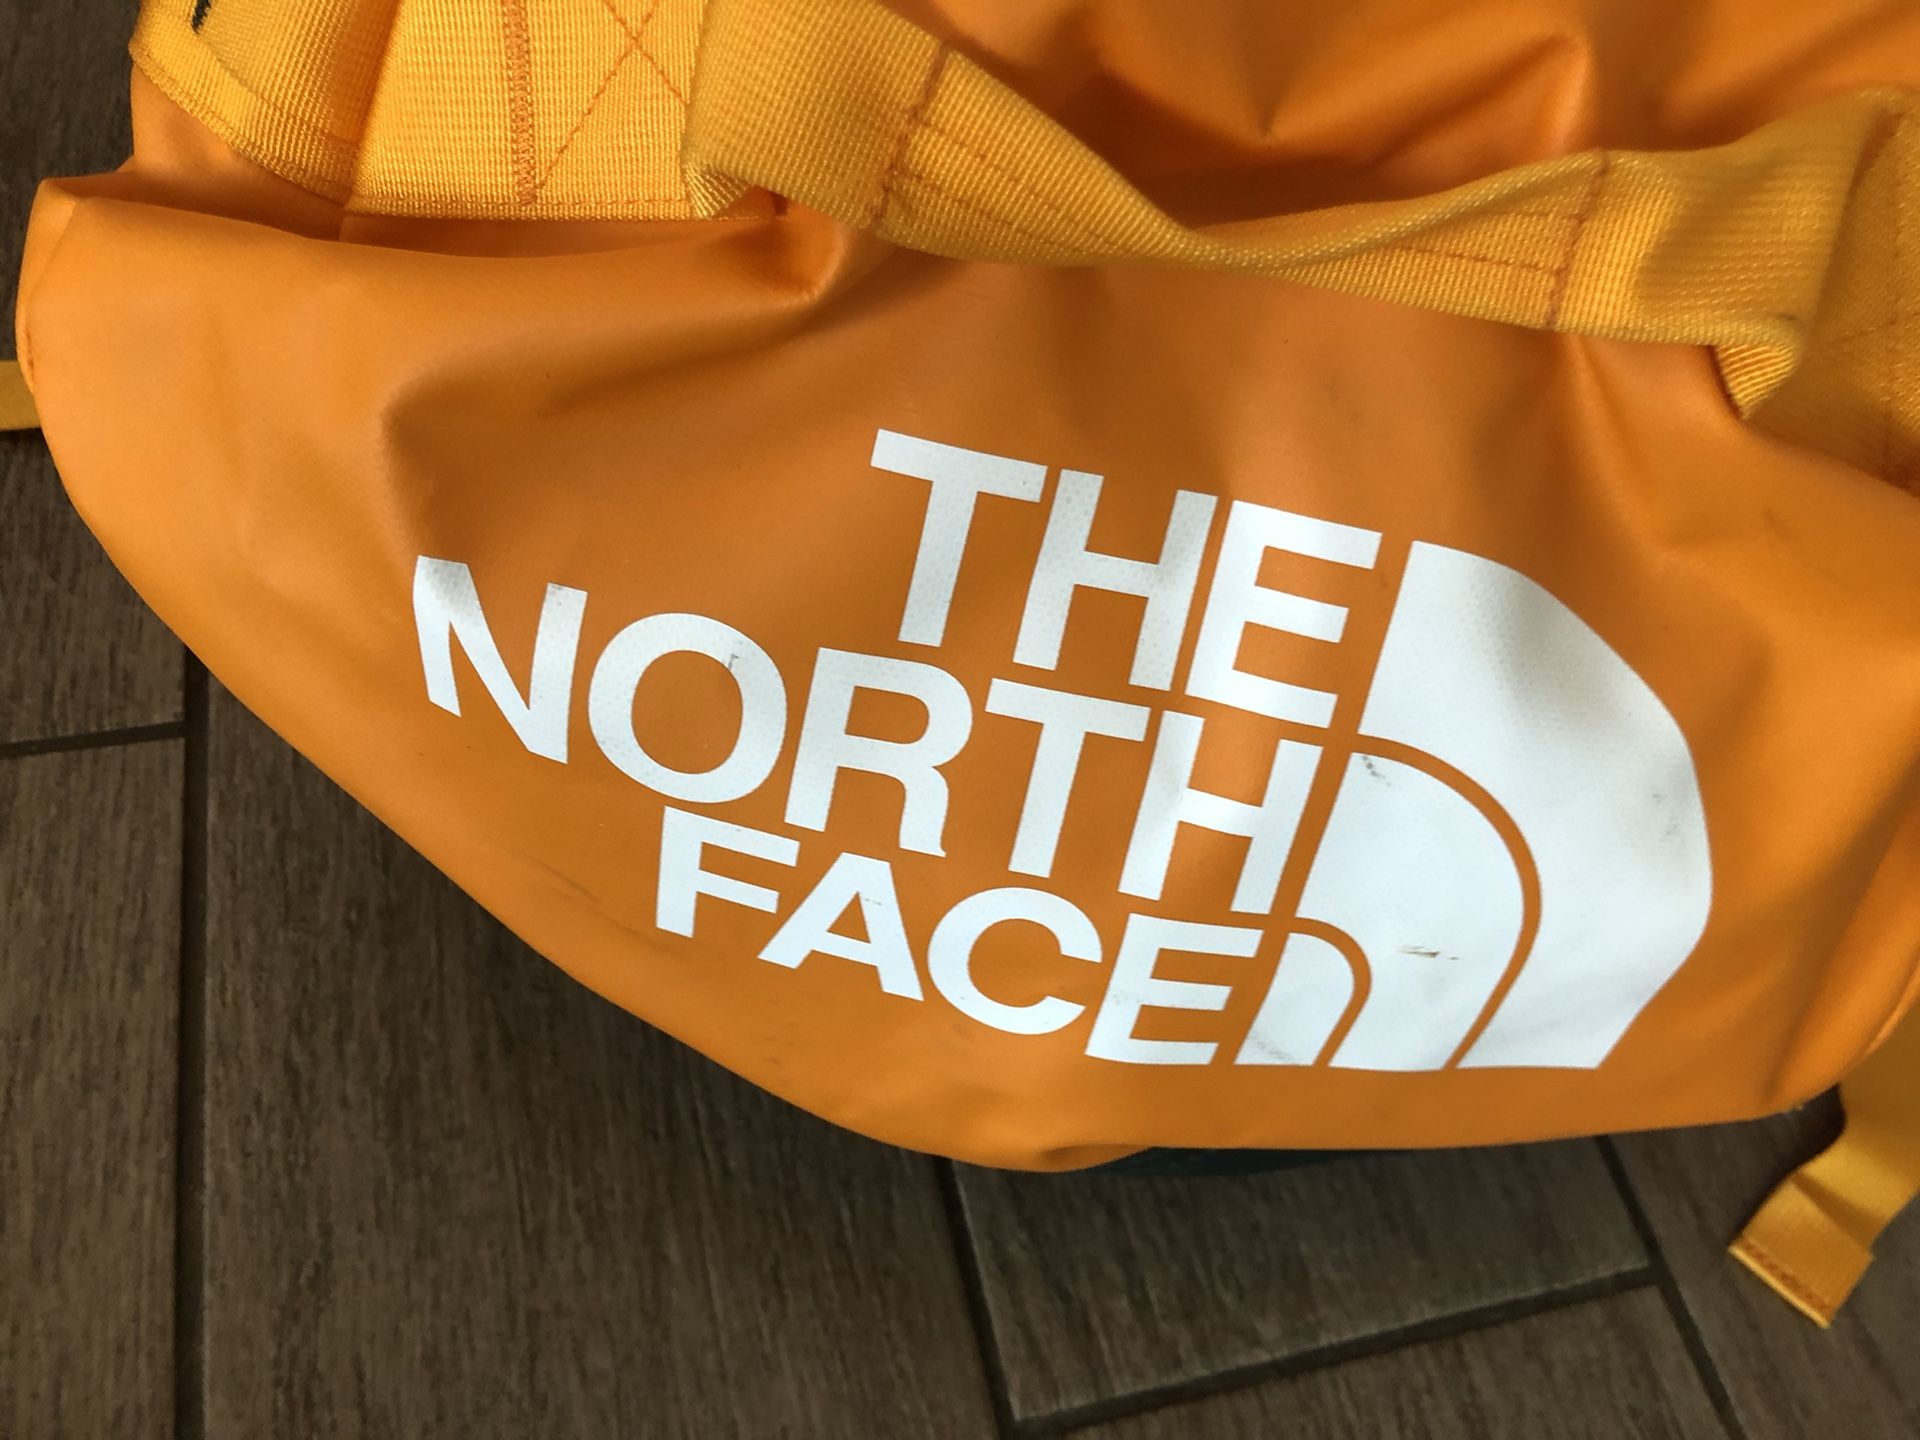 BOMBPROOF $139 North Face Base Camp Duffle Bag